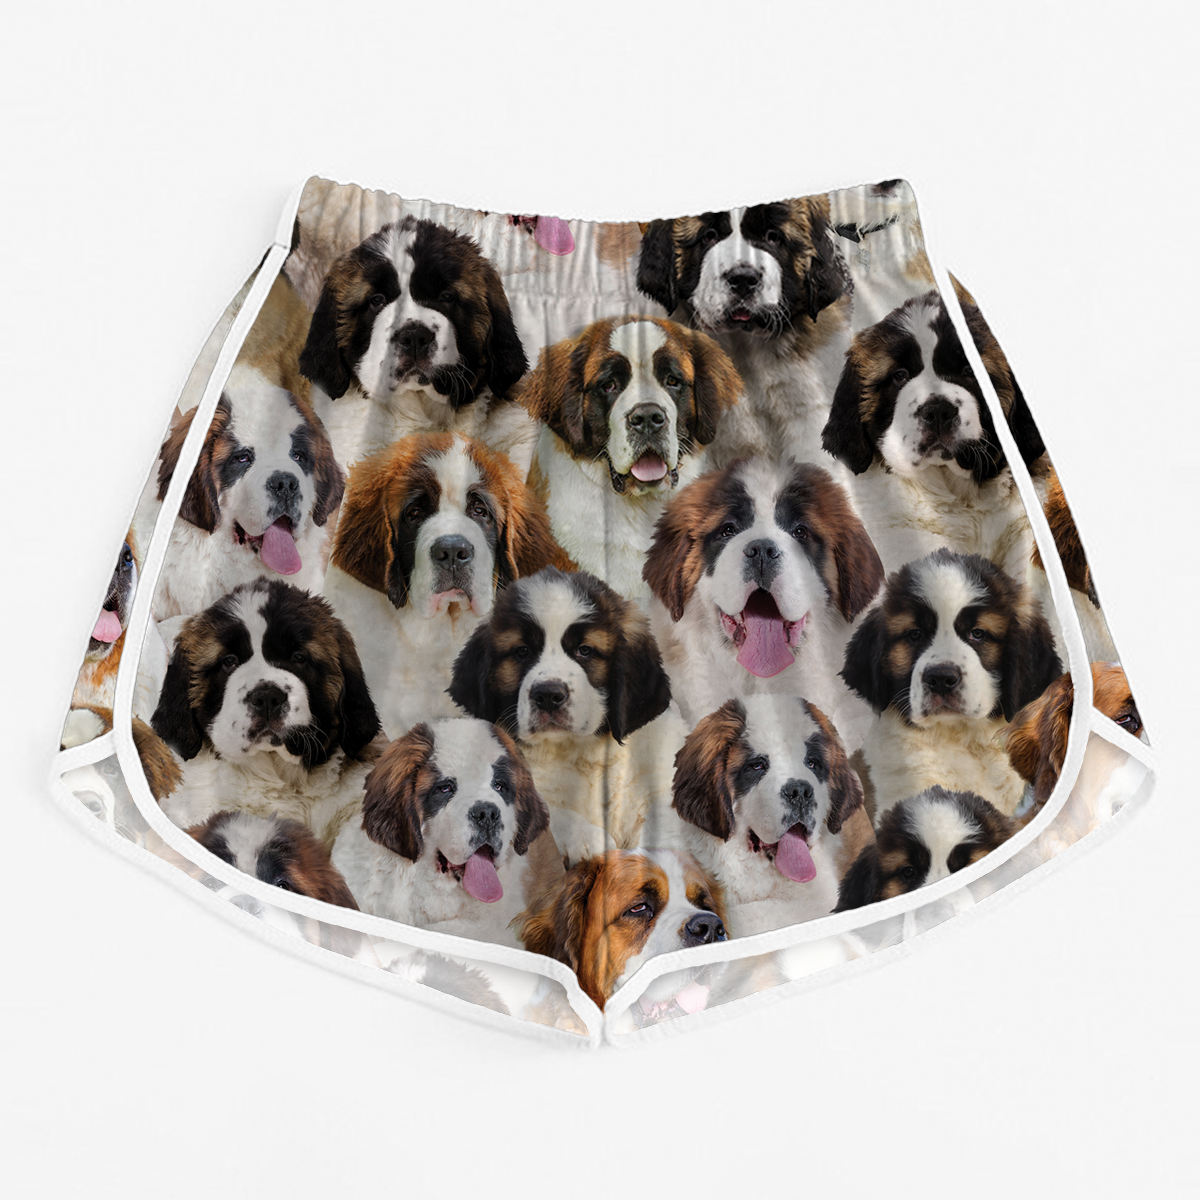 You Will Have A Bunch Of St. Bernards - Women's Running Shorts V1